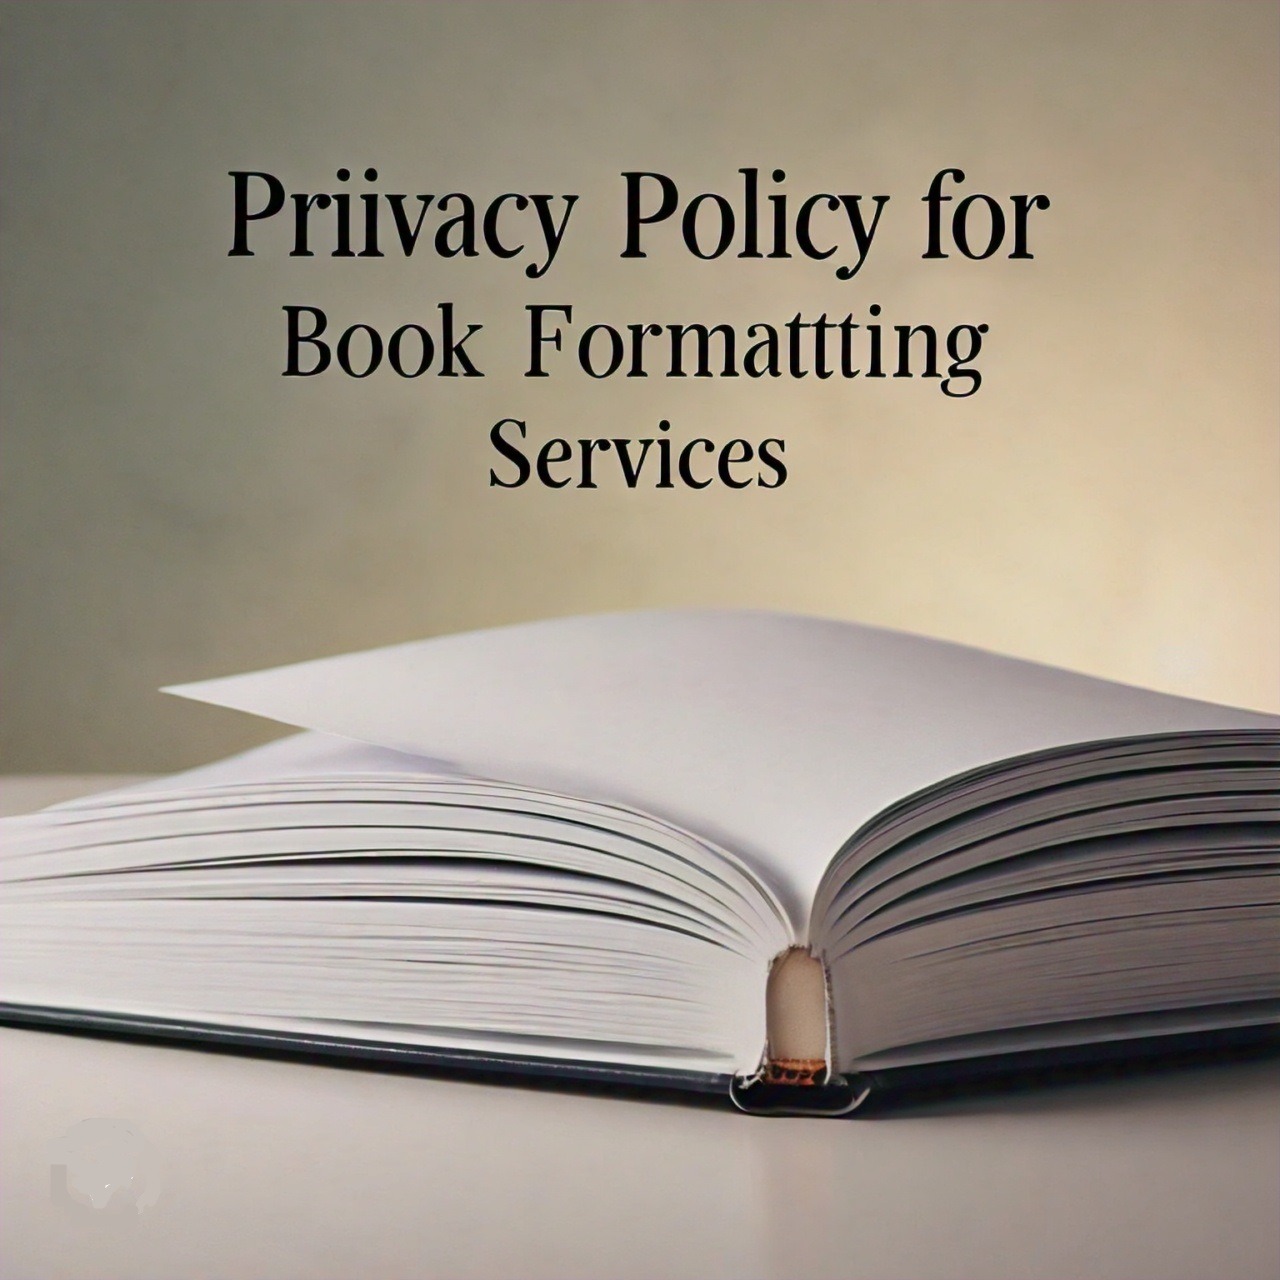 Privacy Policy for Book Formatting Services